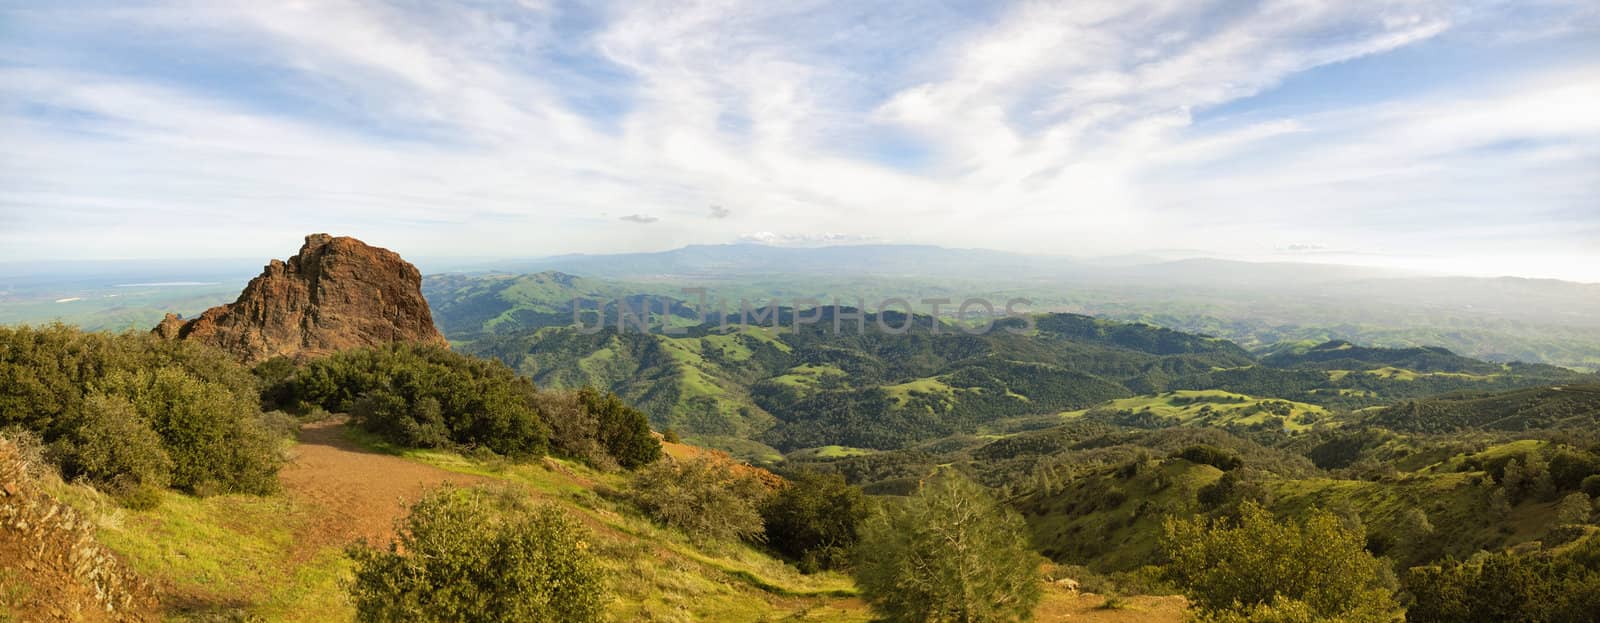 View from Mt Diablo  by whitechild